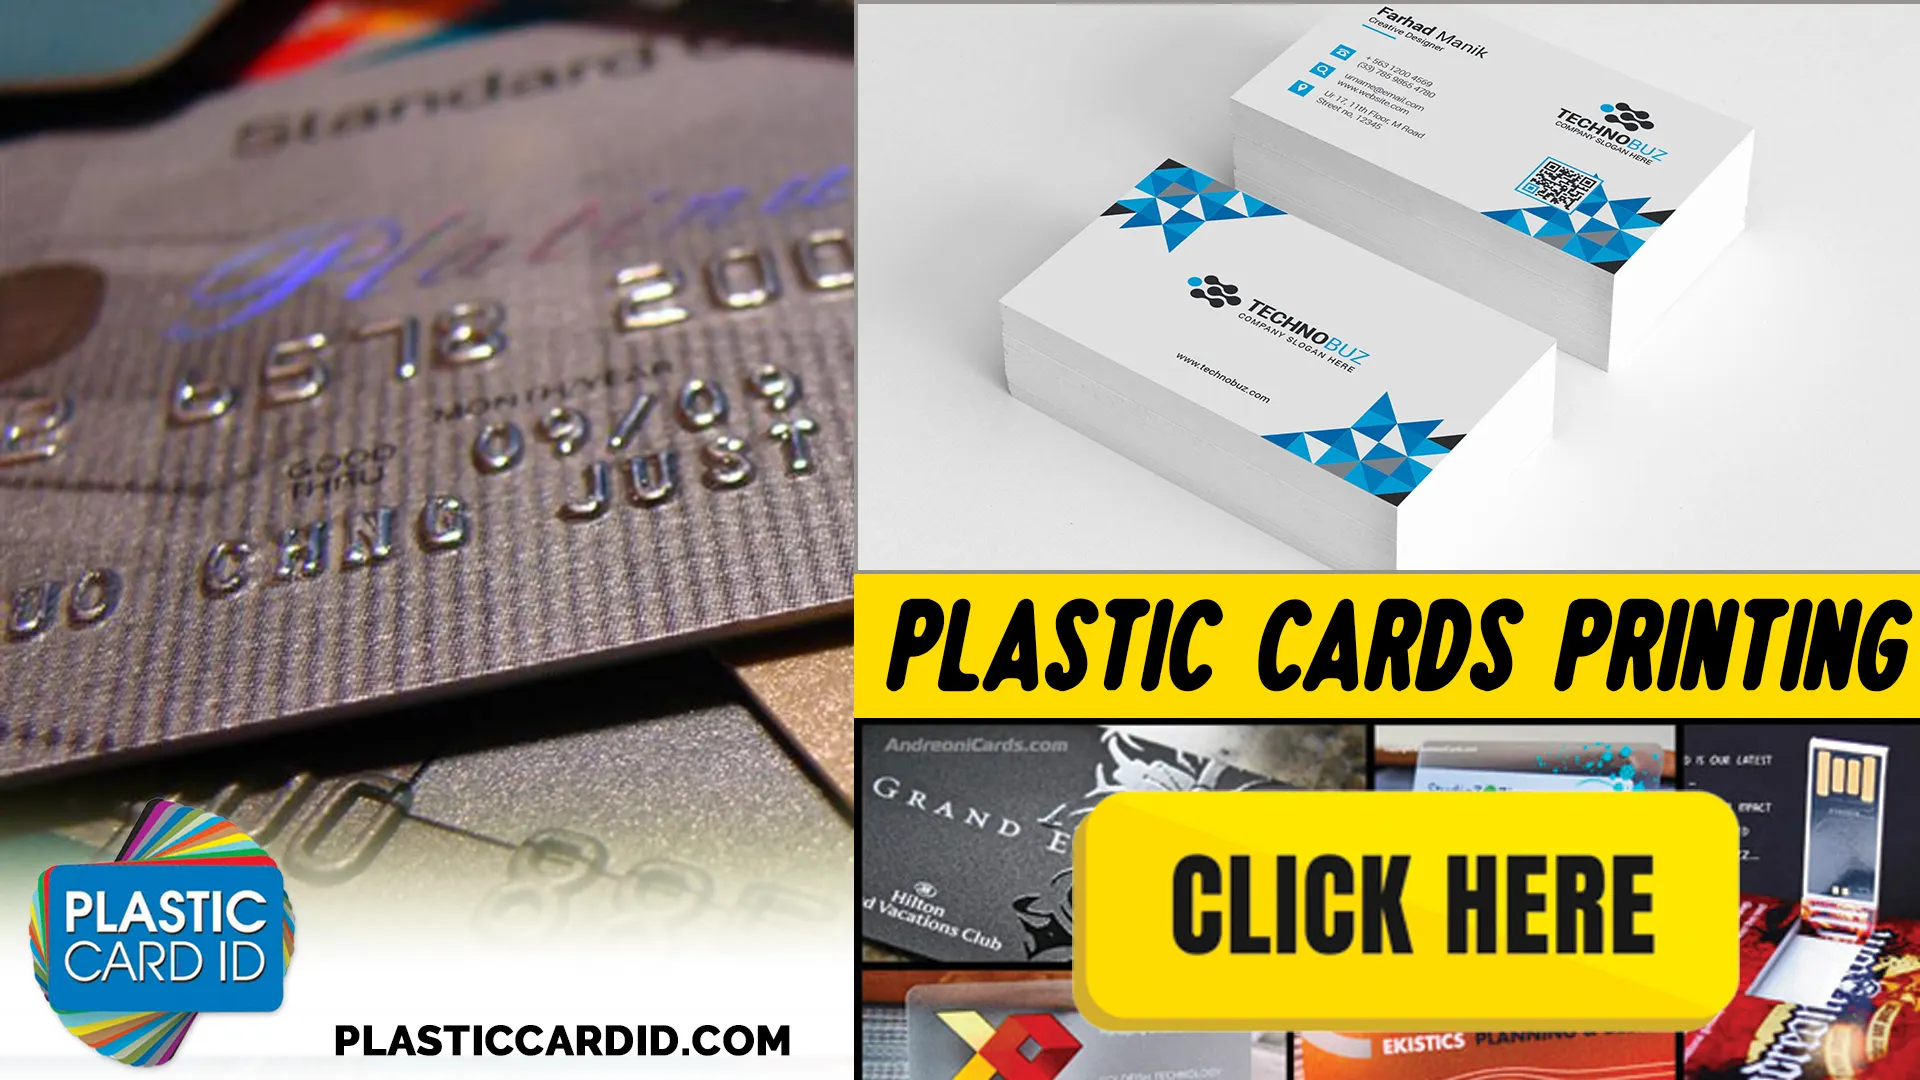 Welcome to Plastic Card ID




: Your Guide to Plastic Card Care